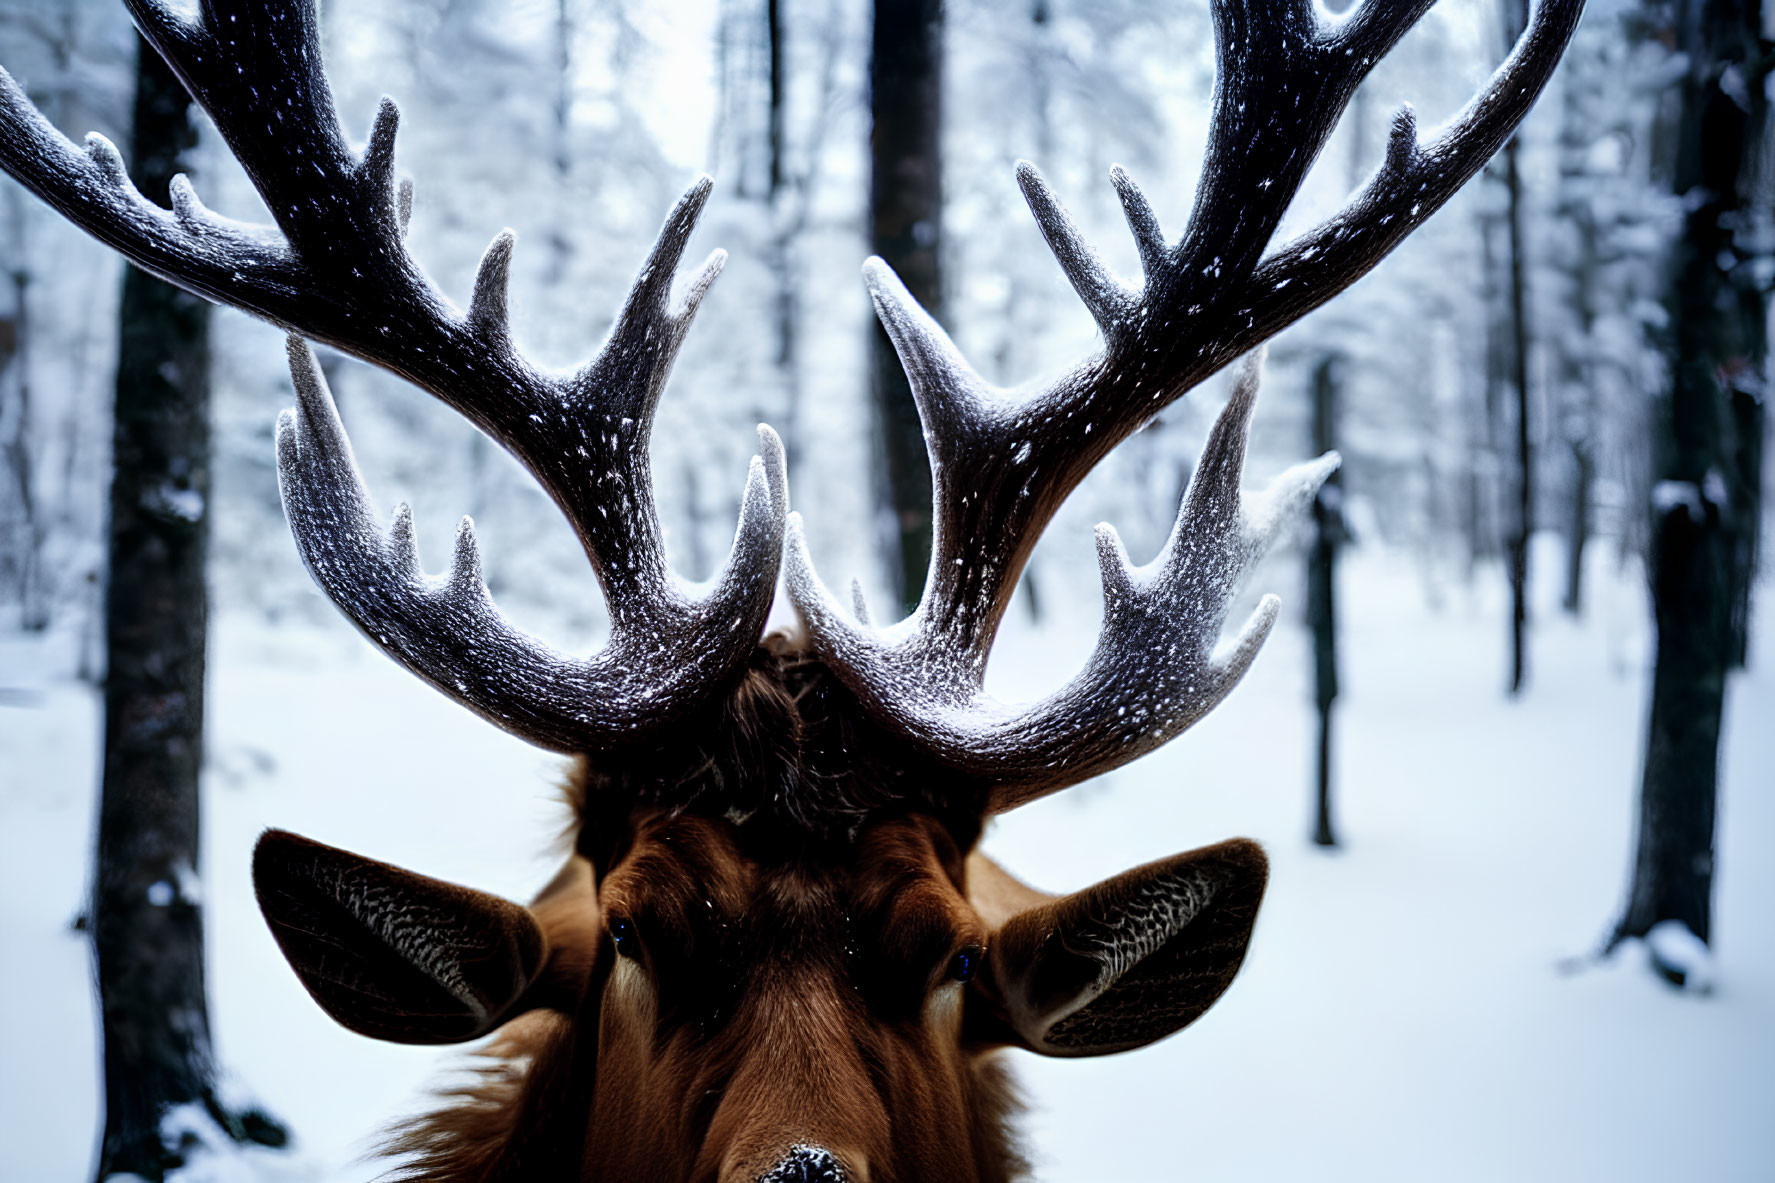 Majestic elk antlers covered in snow in snowy forest.